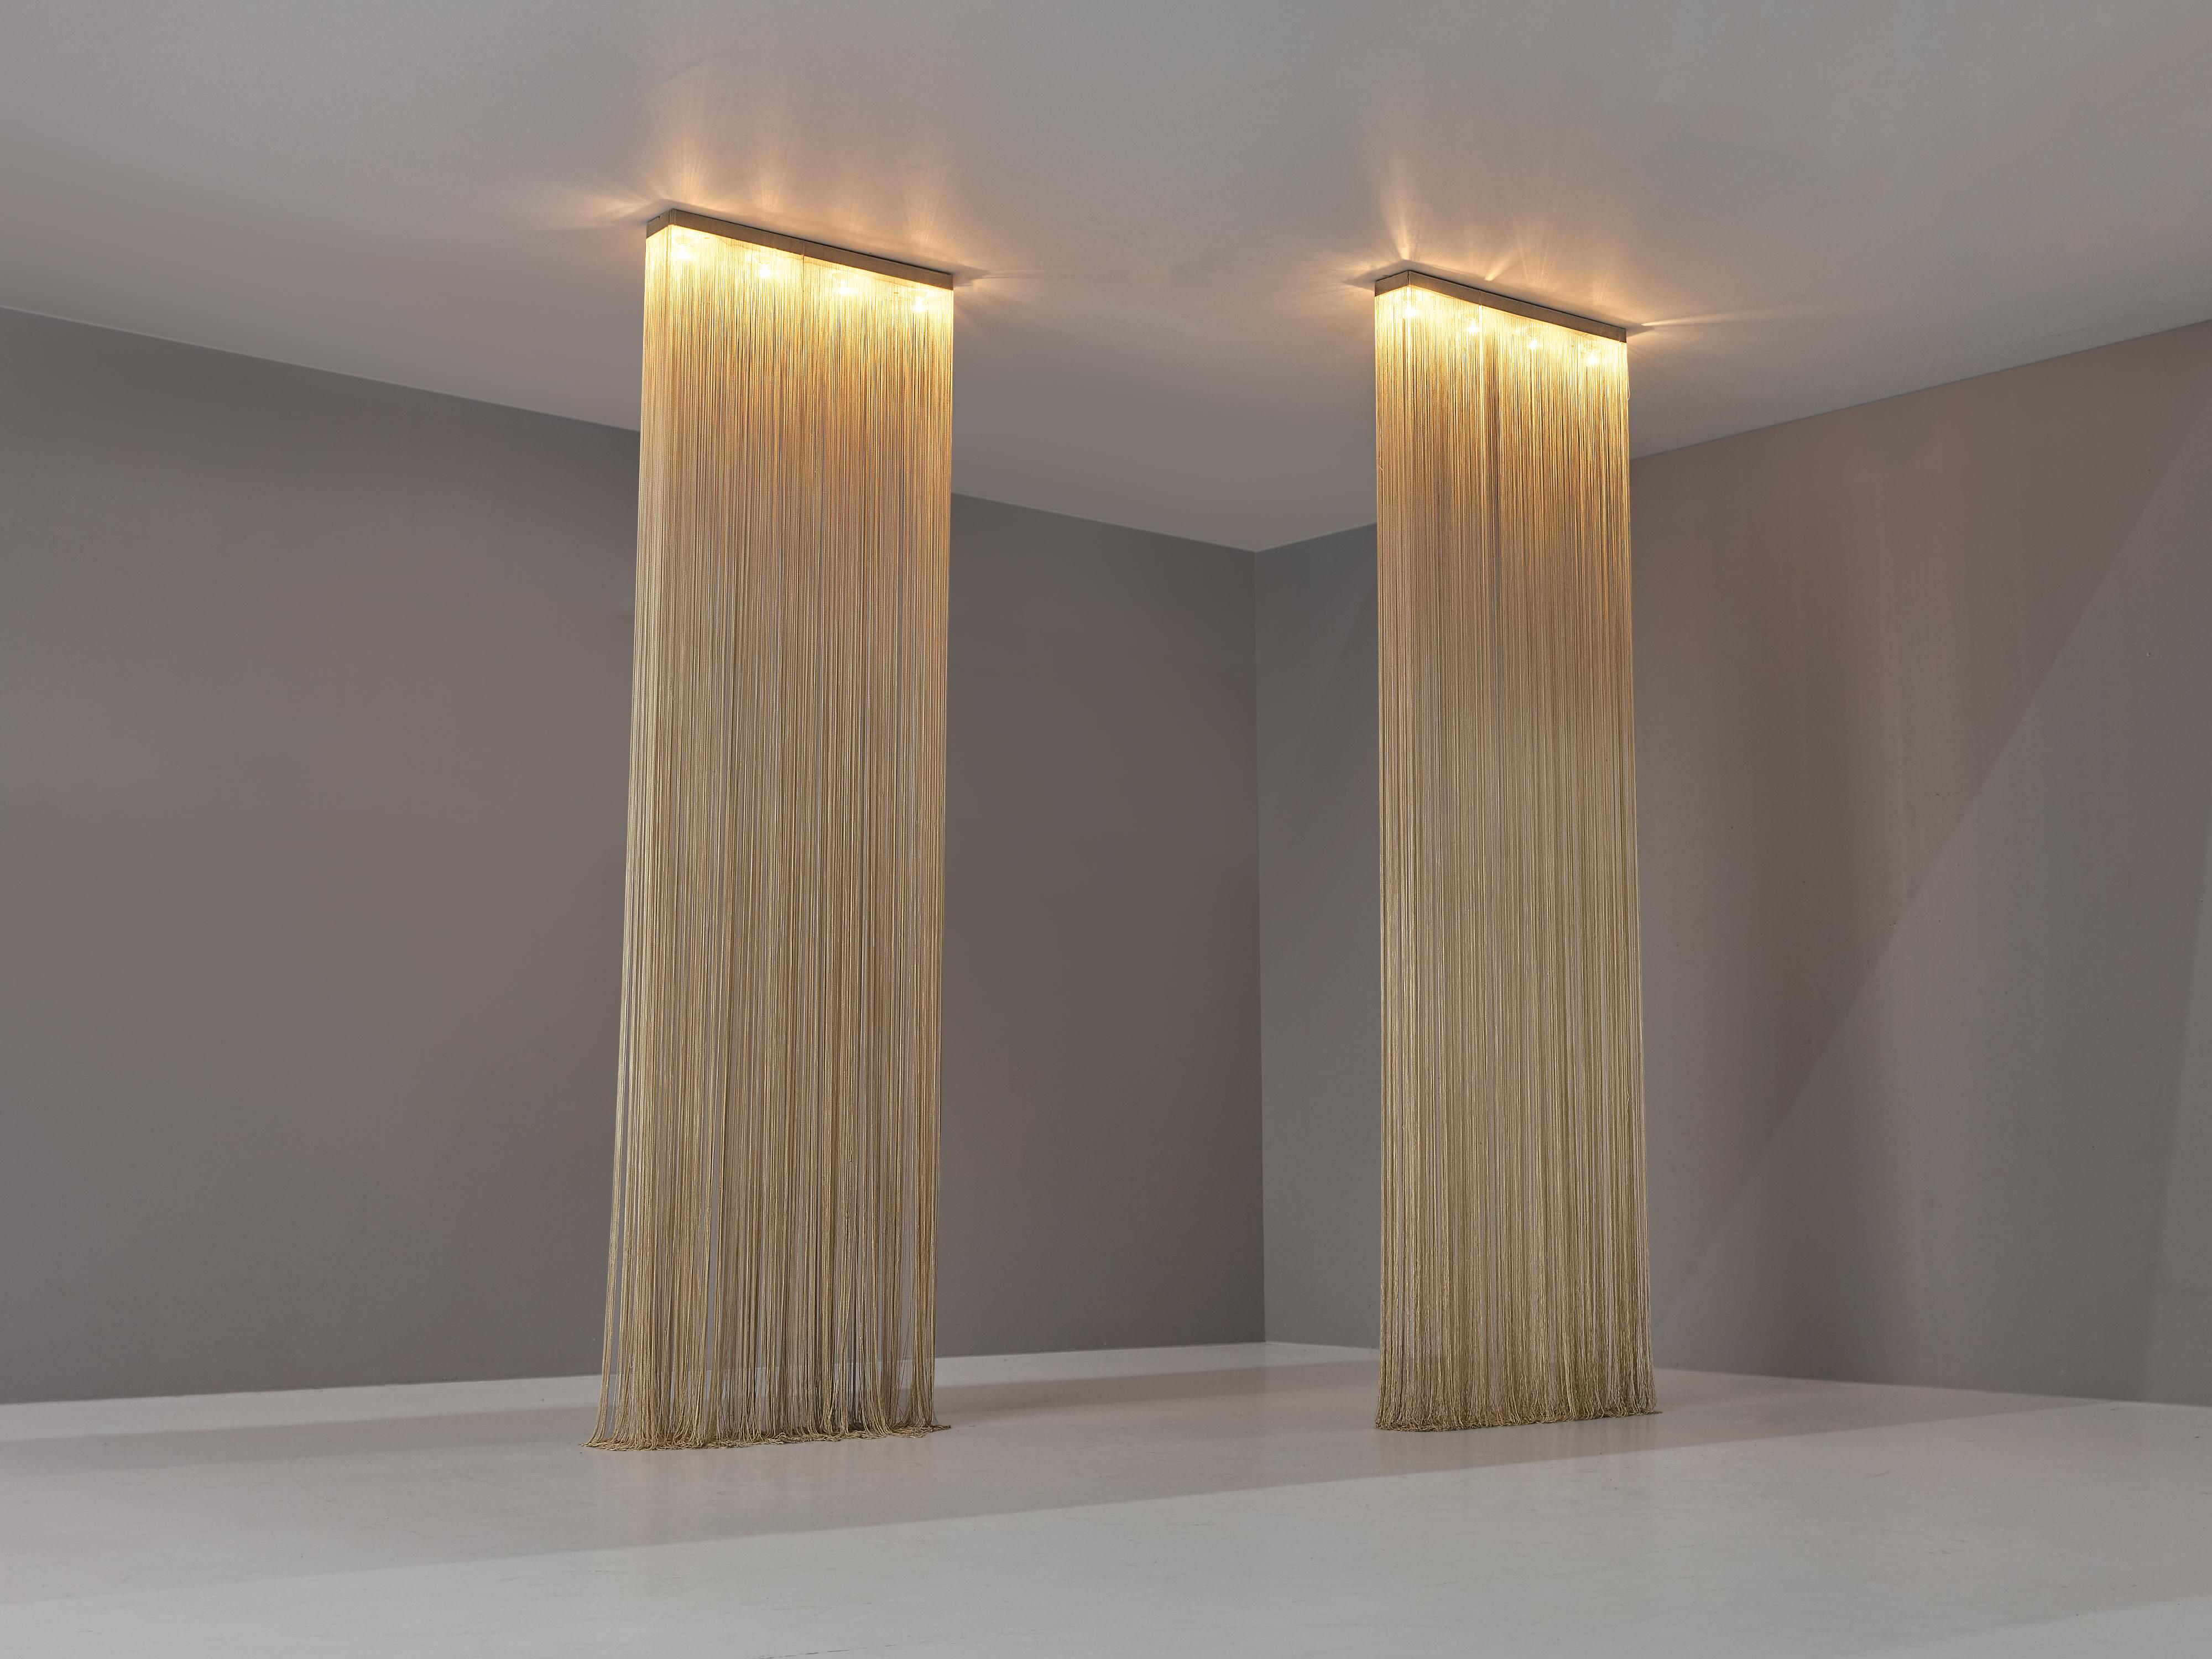 Mariyo Yagi for Syrrah, 'Garbo' chandeliers, metal, nylon, Italy, 1976

Enchanting pair of 'Garbo' fringe chandeliers designed by Japanese designer Mariyo Yagi and manufactured by Syrrah. Each mounted metal ceiling base houses four light bulbs that